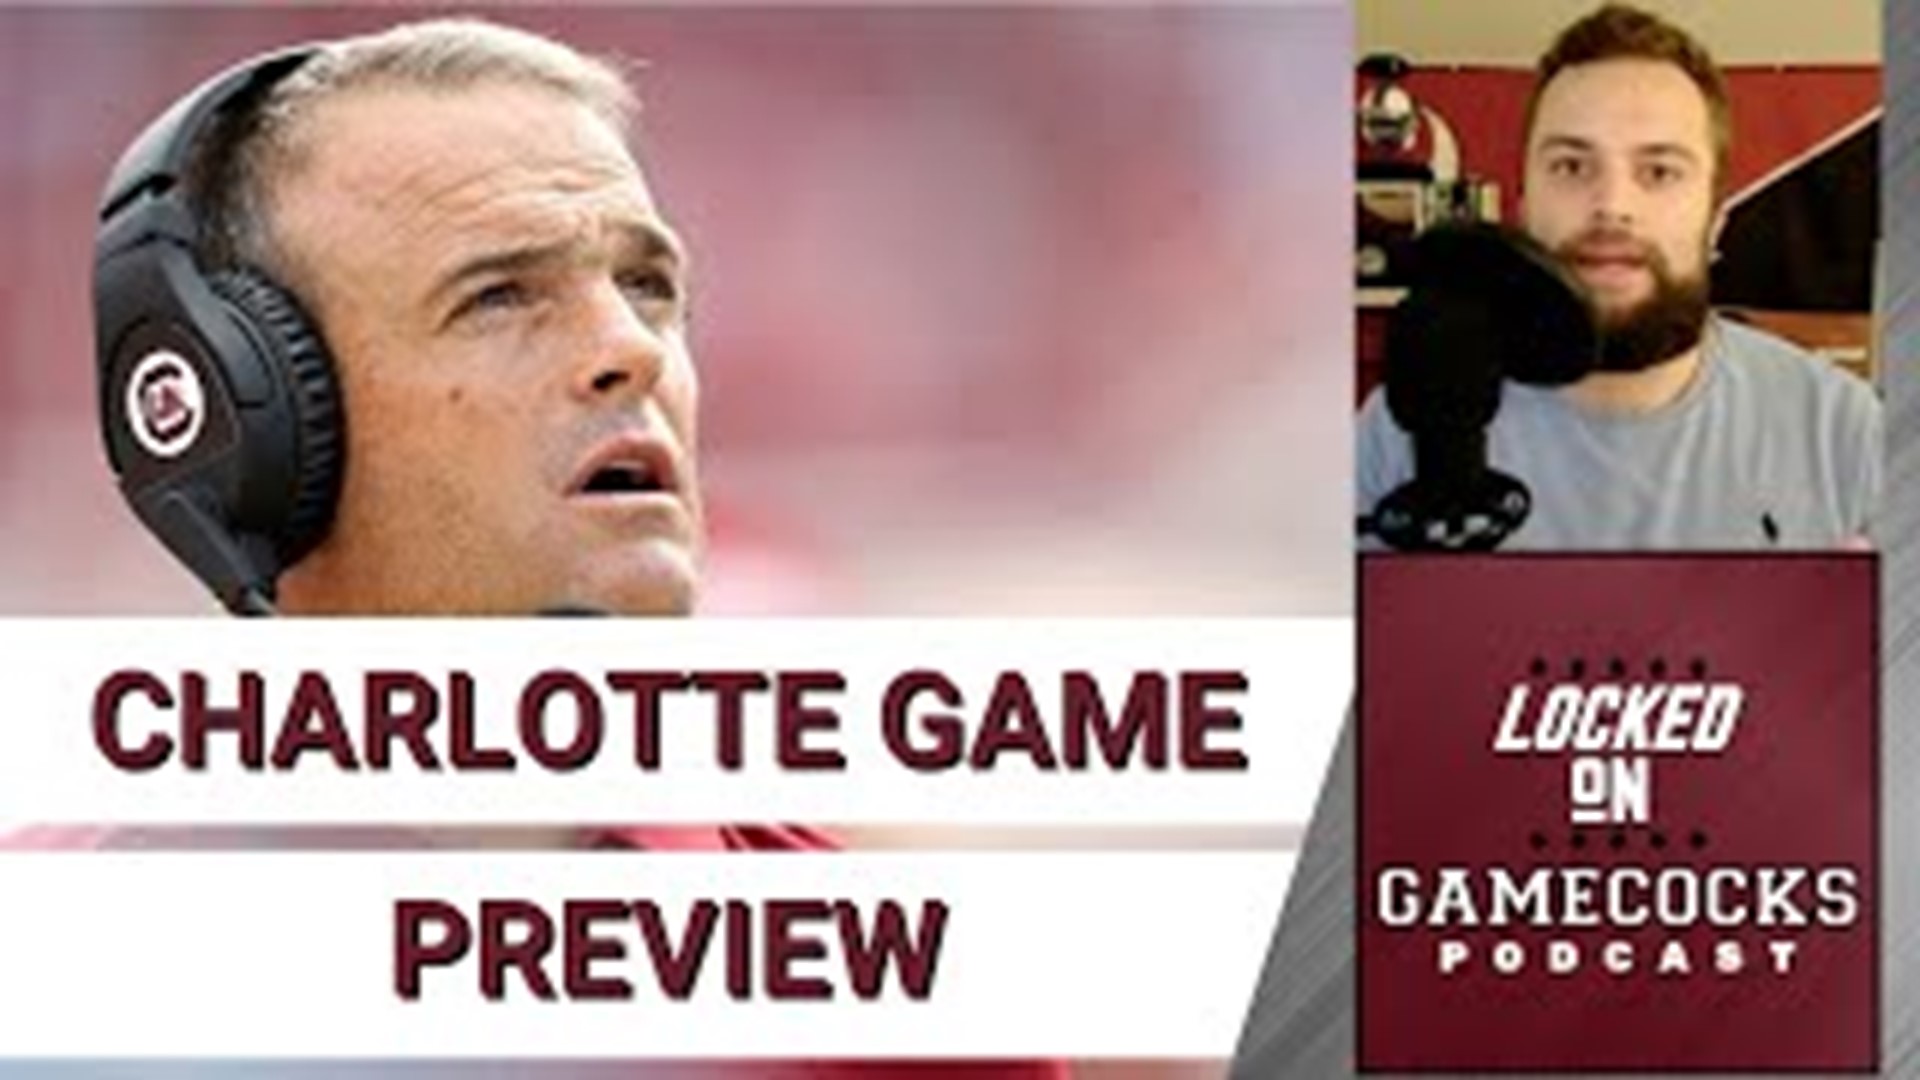 Andrew gives his final overall thoughts on Shane Beamer and the South Carolina Gamecocks Saturday night matchup